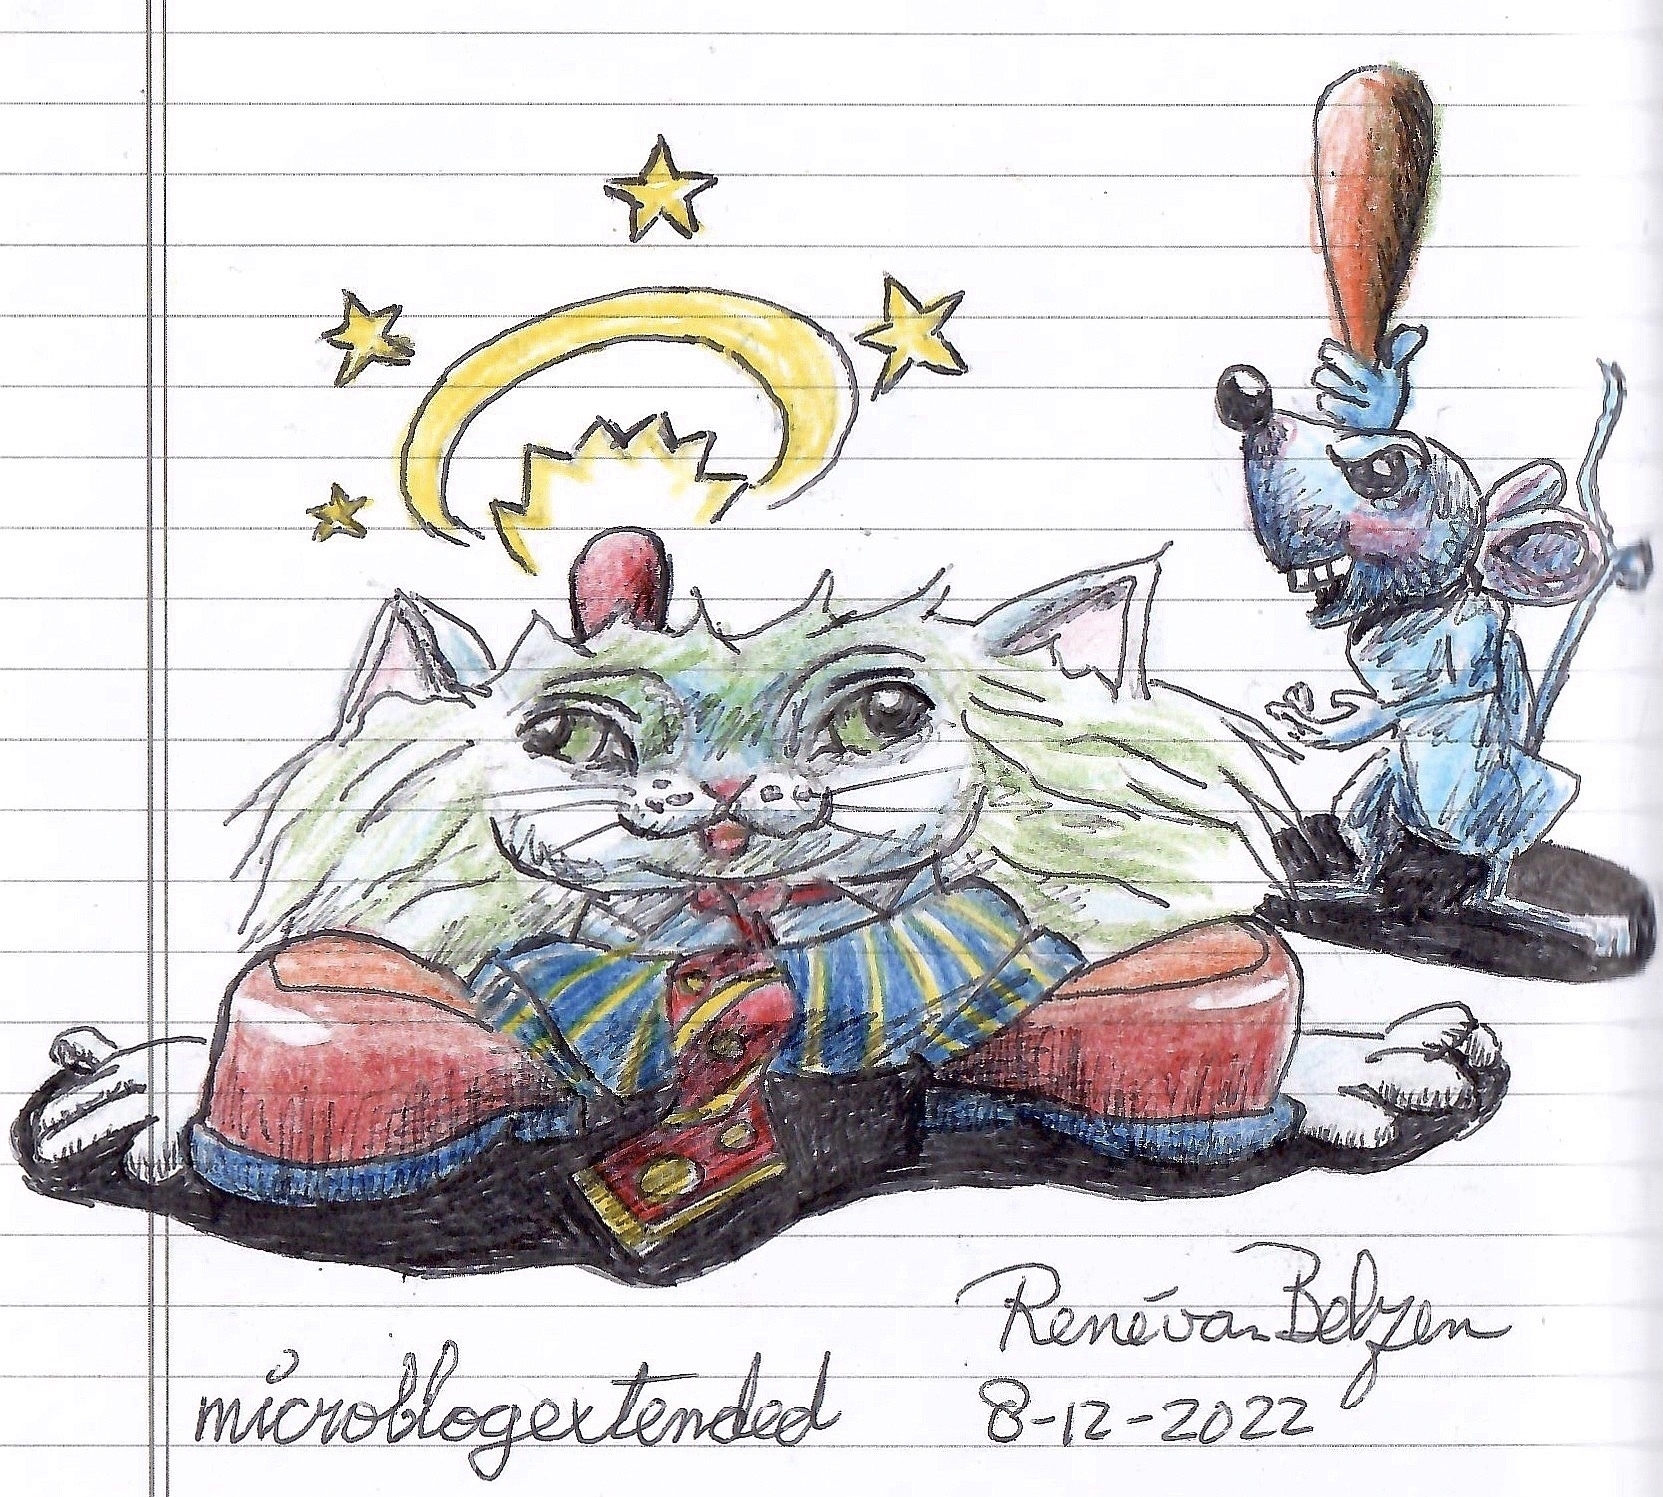 ballpoint pen and colored pencil sketch of cartoon violence, i.e. a cat splatted by mouse